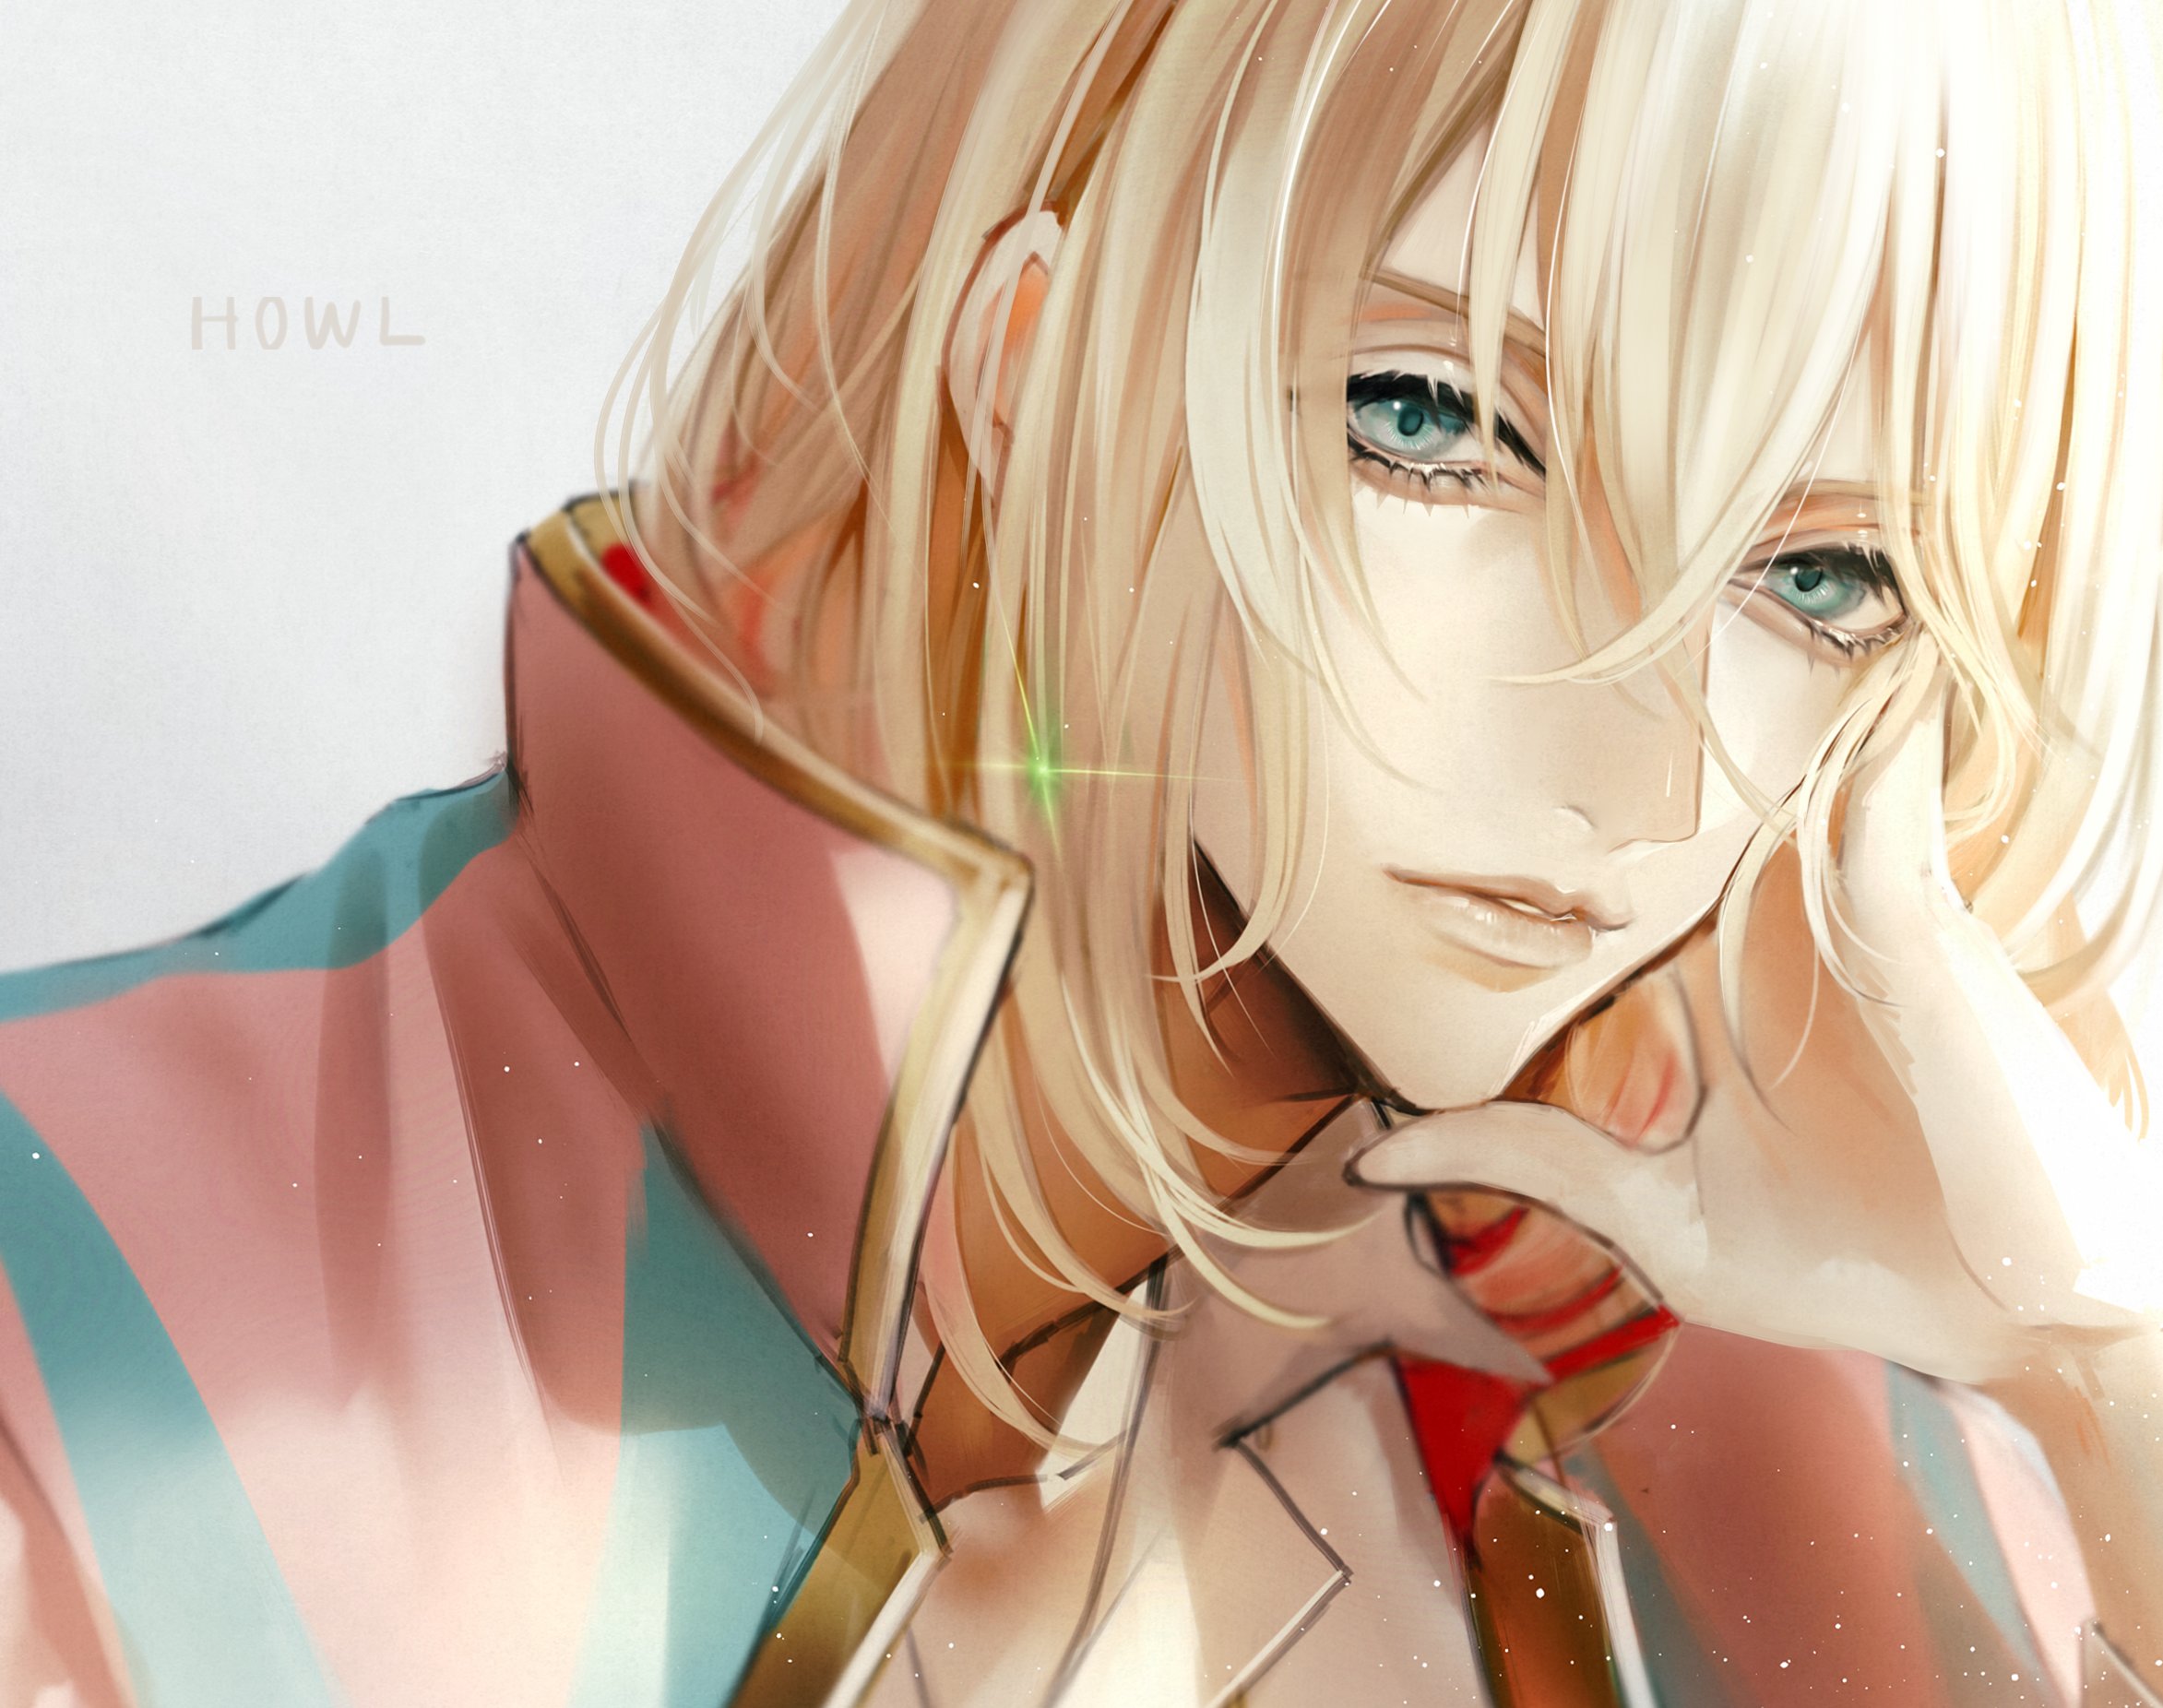 Mobile wallpaper: Anime, Howl's Moving Castle, Howl Jenkins Pendragon,  Sophie Hatter, 1016738 download the picture for free.